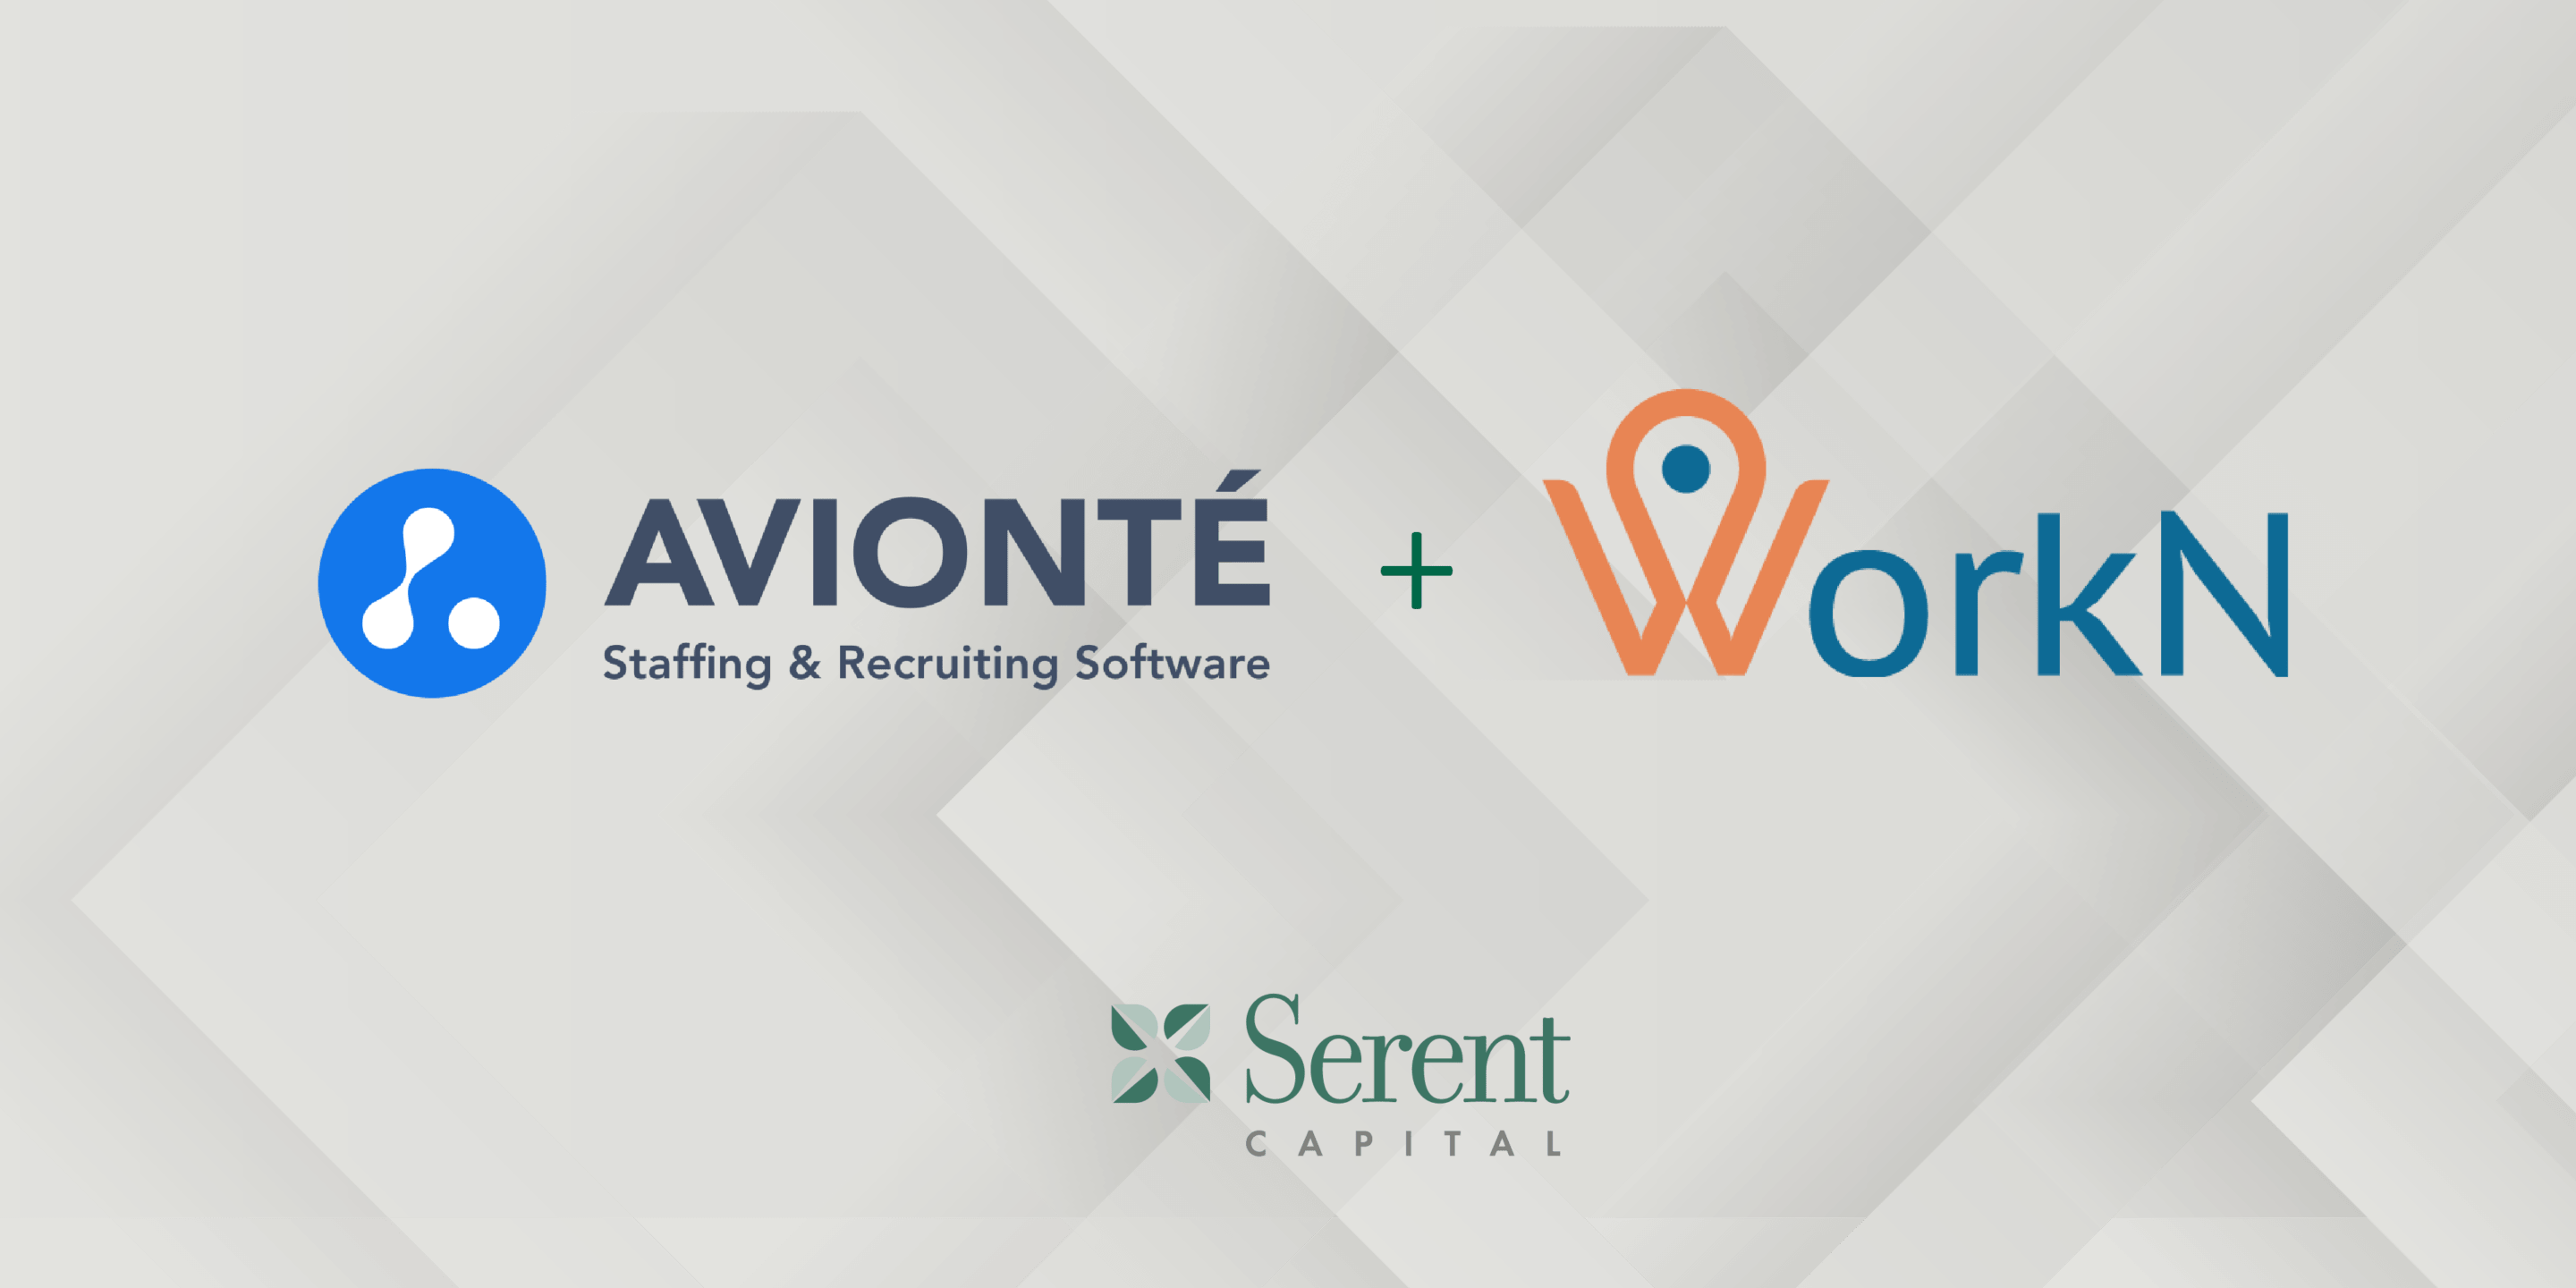 Serent Portfolio Company Avionté Acquires Mobile Online Staffing Platform WorkN, Creating a Talent Enablement Powerhouse for Staffing and Recruiting